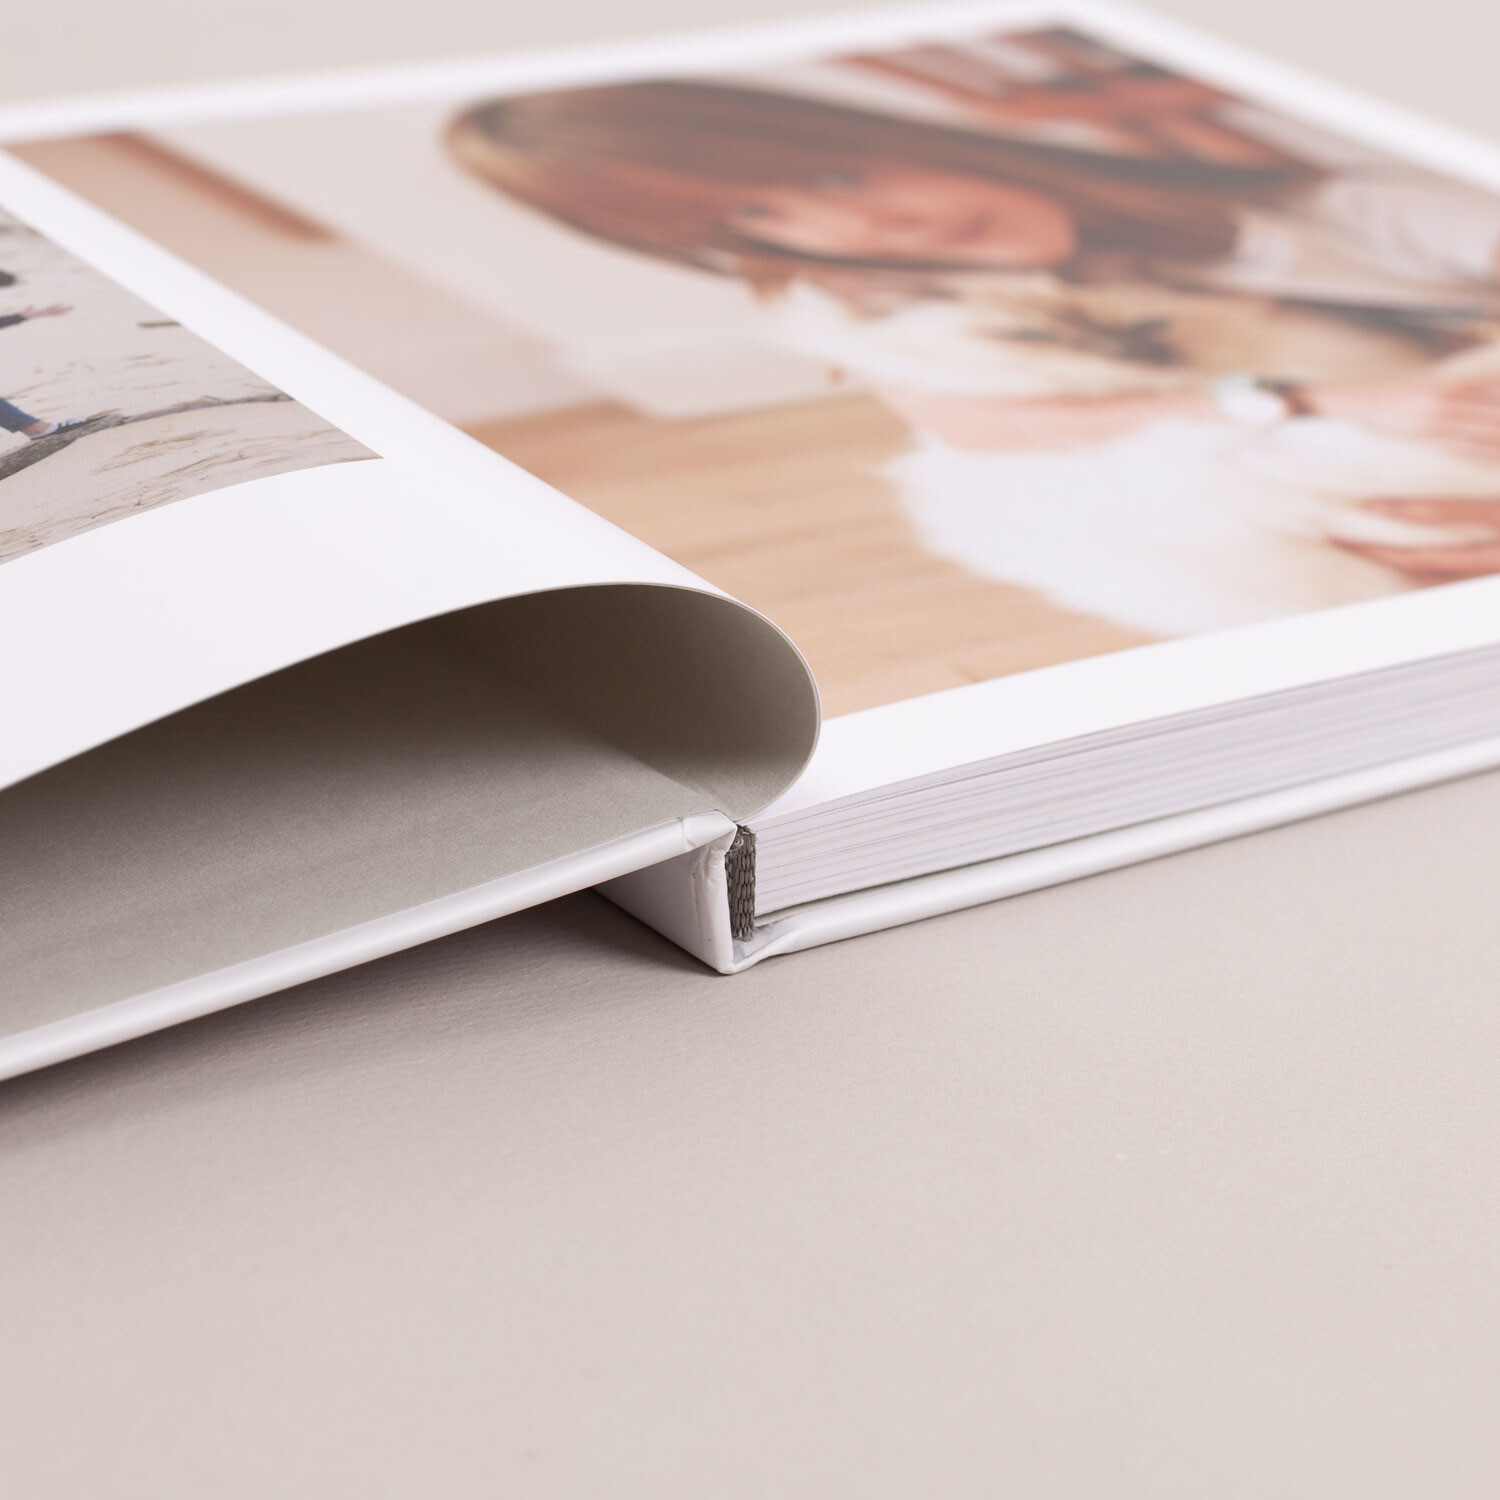 Hardcover Business Photo Albums